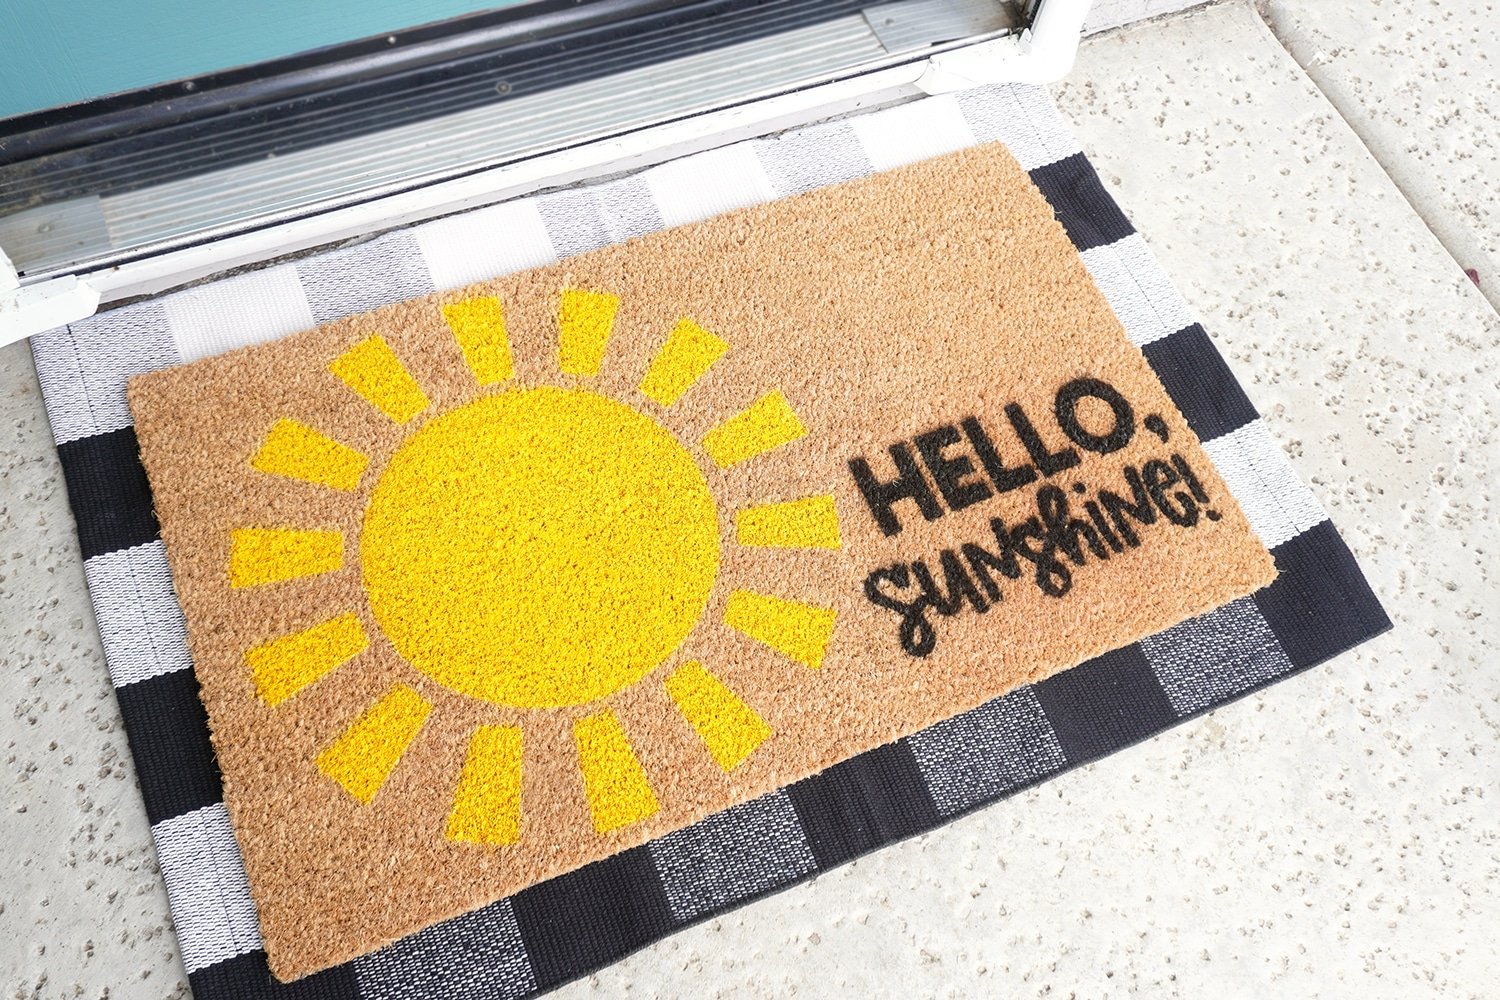 hello sunshine finished easy door mat project made with cricut